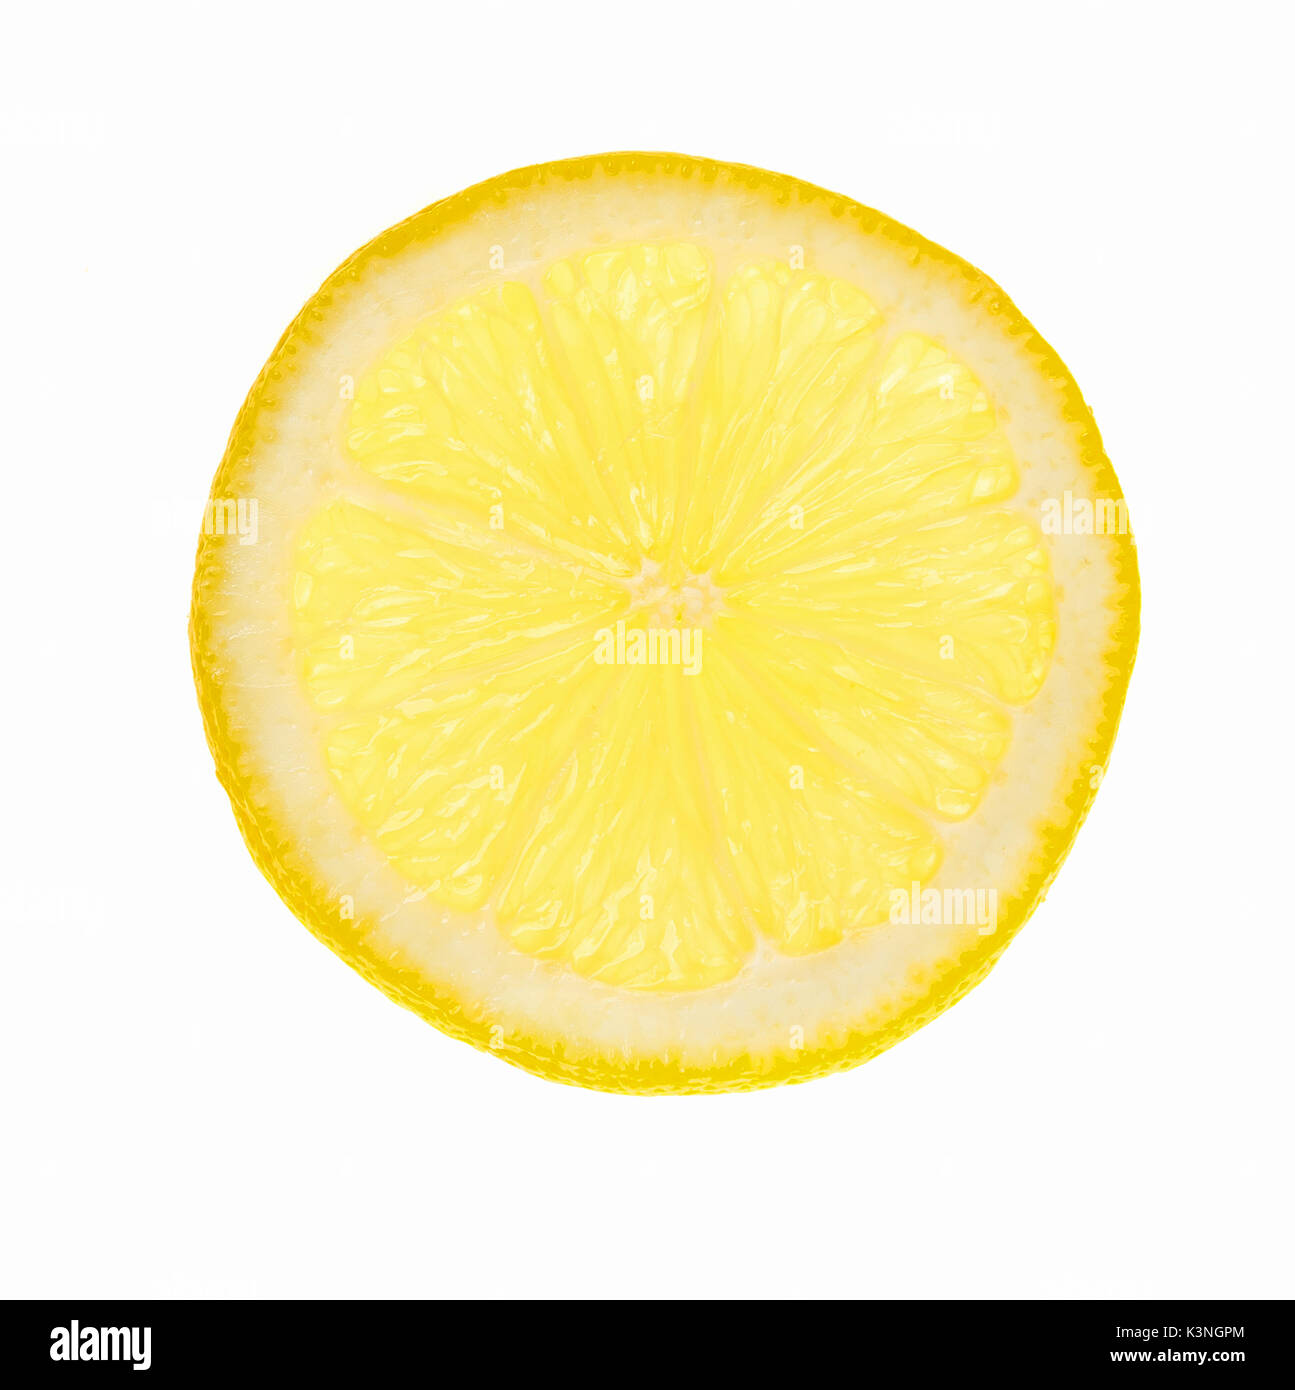 Thin sliced lemon yellow for cooking Ingredients Stock Photo